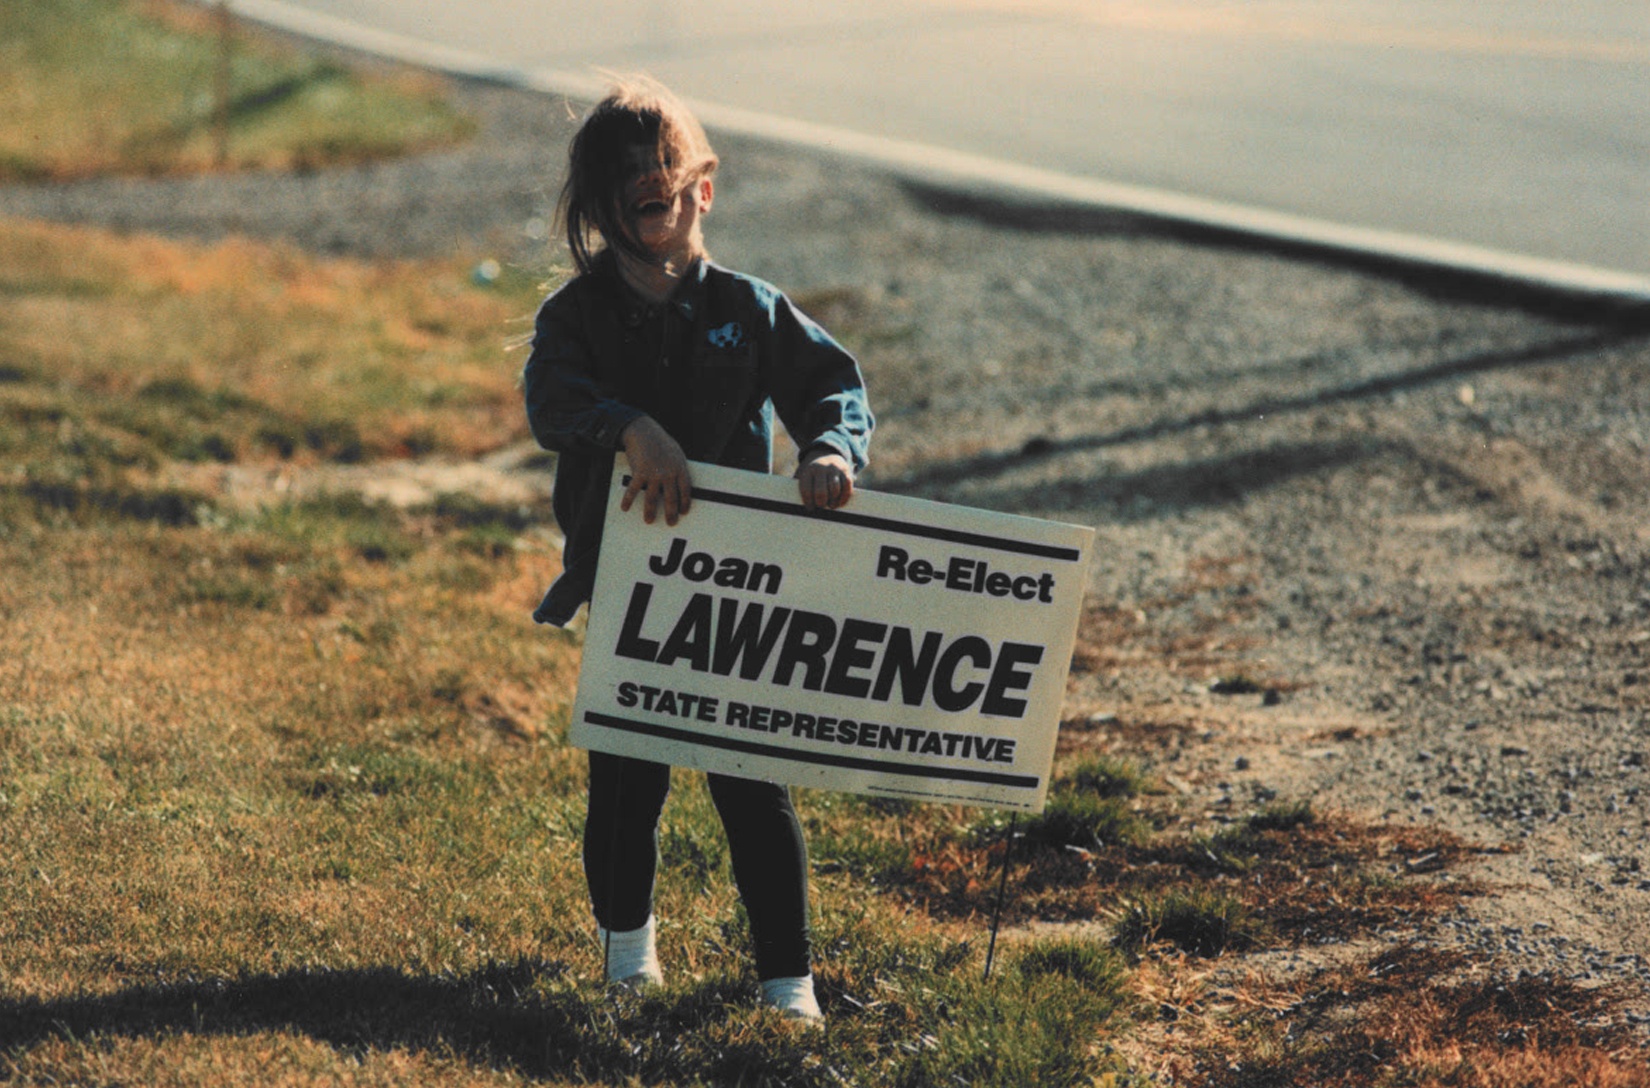 IMAGE-Meredith-Baker-with-campaign-sign-1994-LAWRENCE